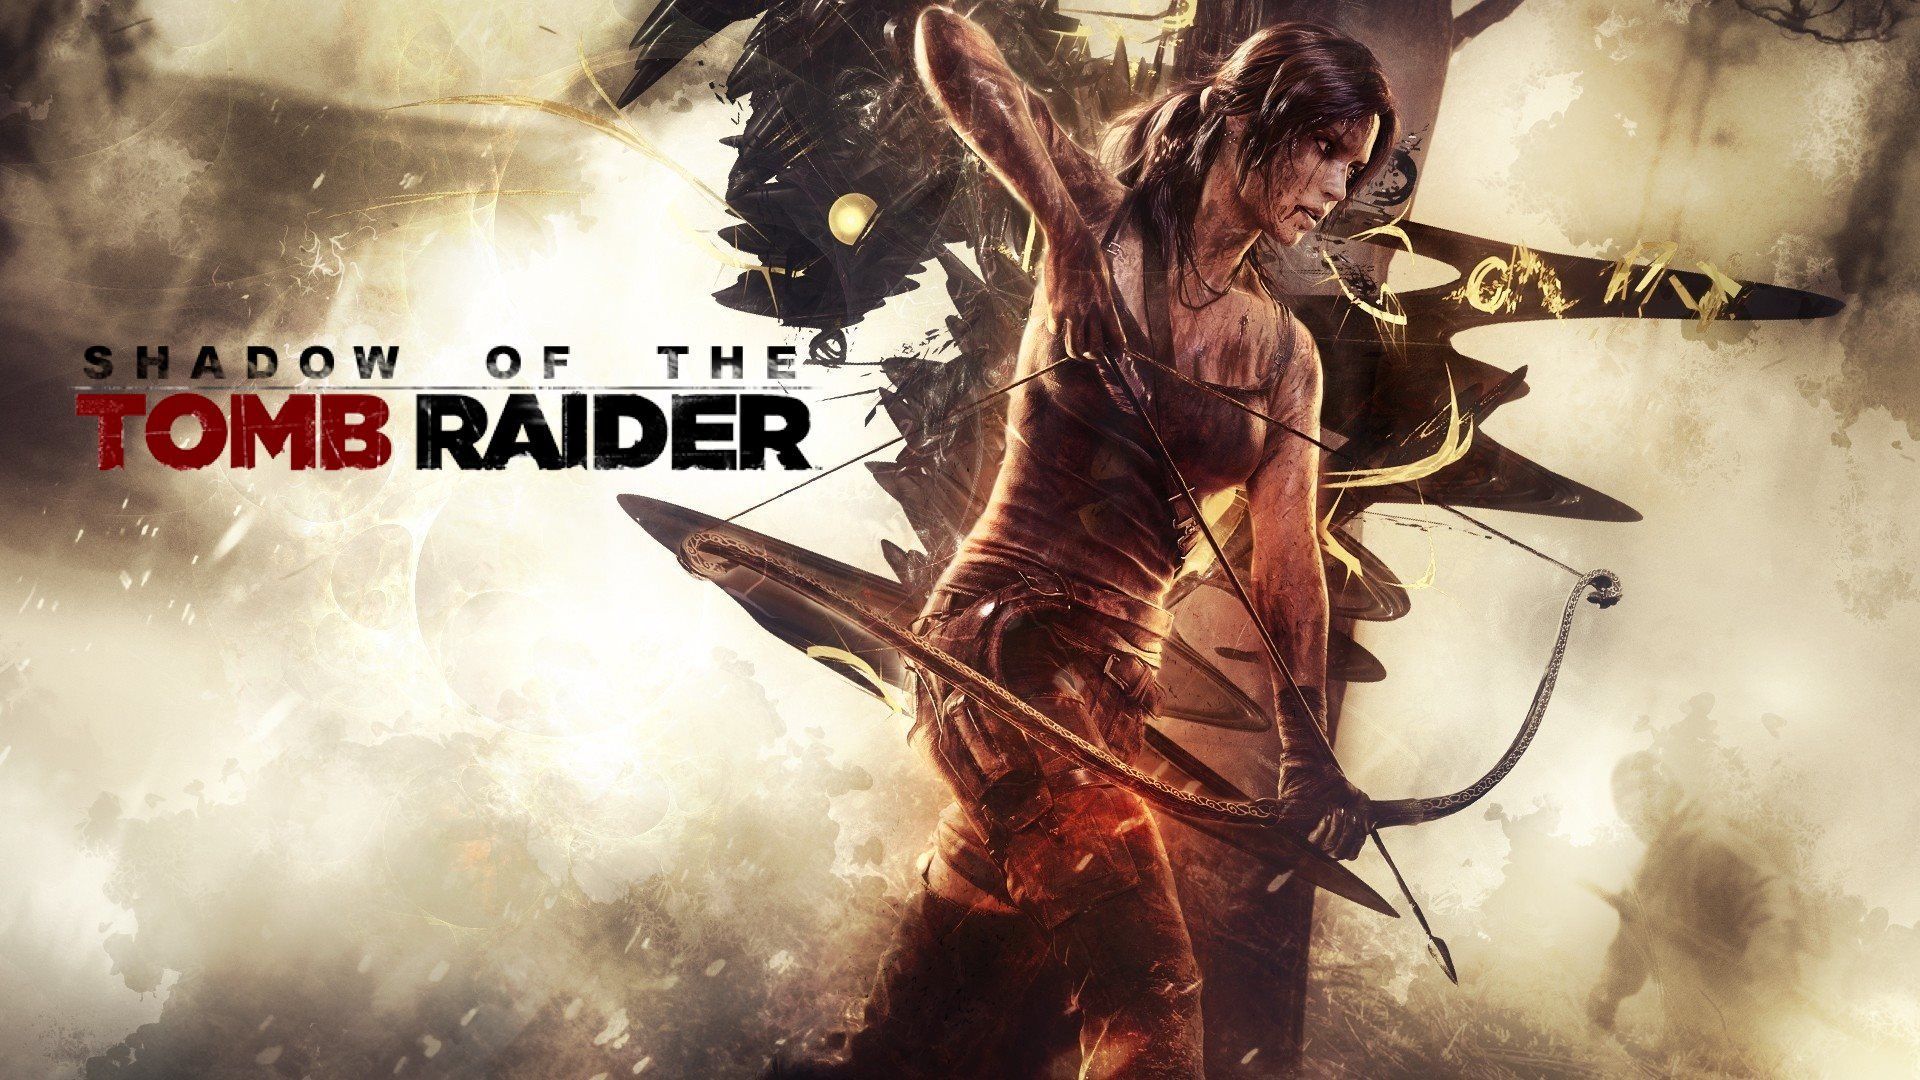 Shadow of the Tomb Raider Crack + Torrent Full PC Game Download 2022